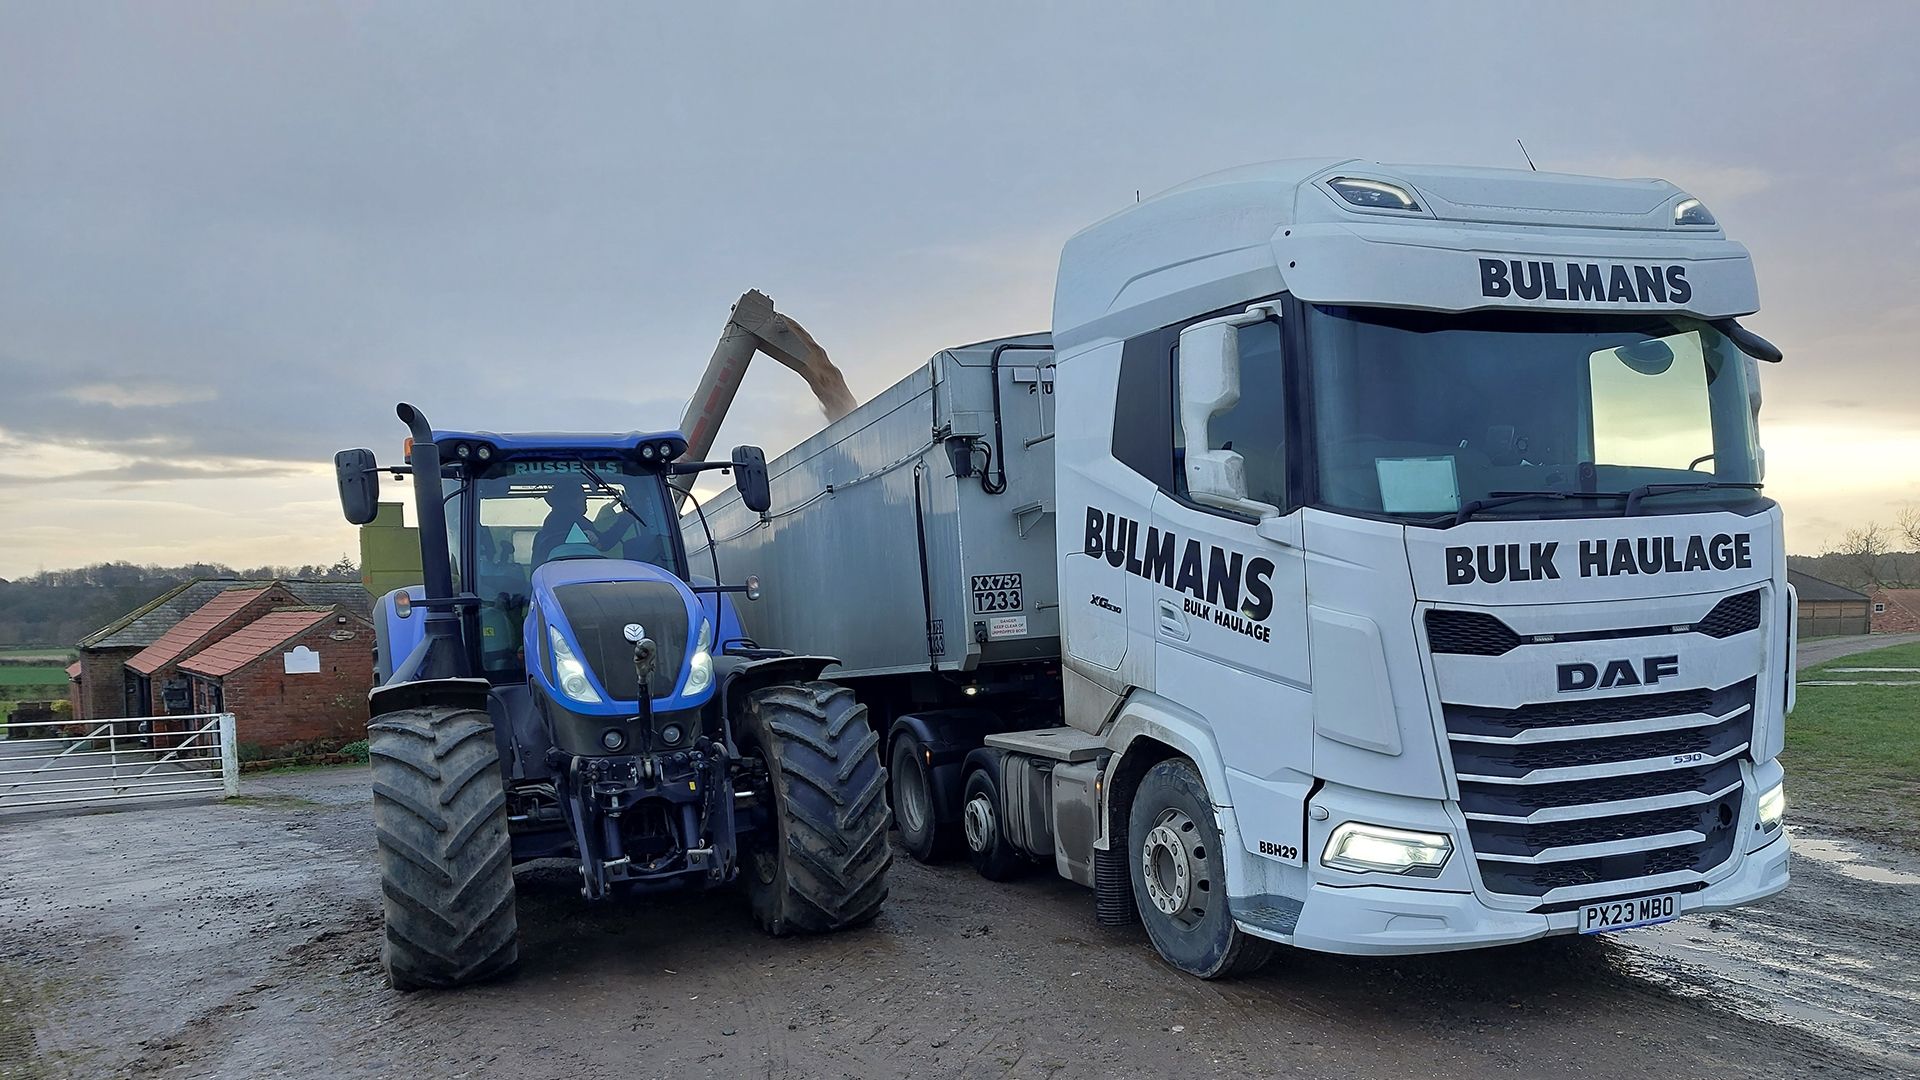 A Bulmans Bulk Haulage DAF truck is being loaded by a blue tractor on a farm, illustrating the collaborative effort in agricultural bulk transport services.